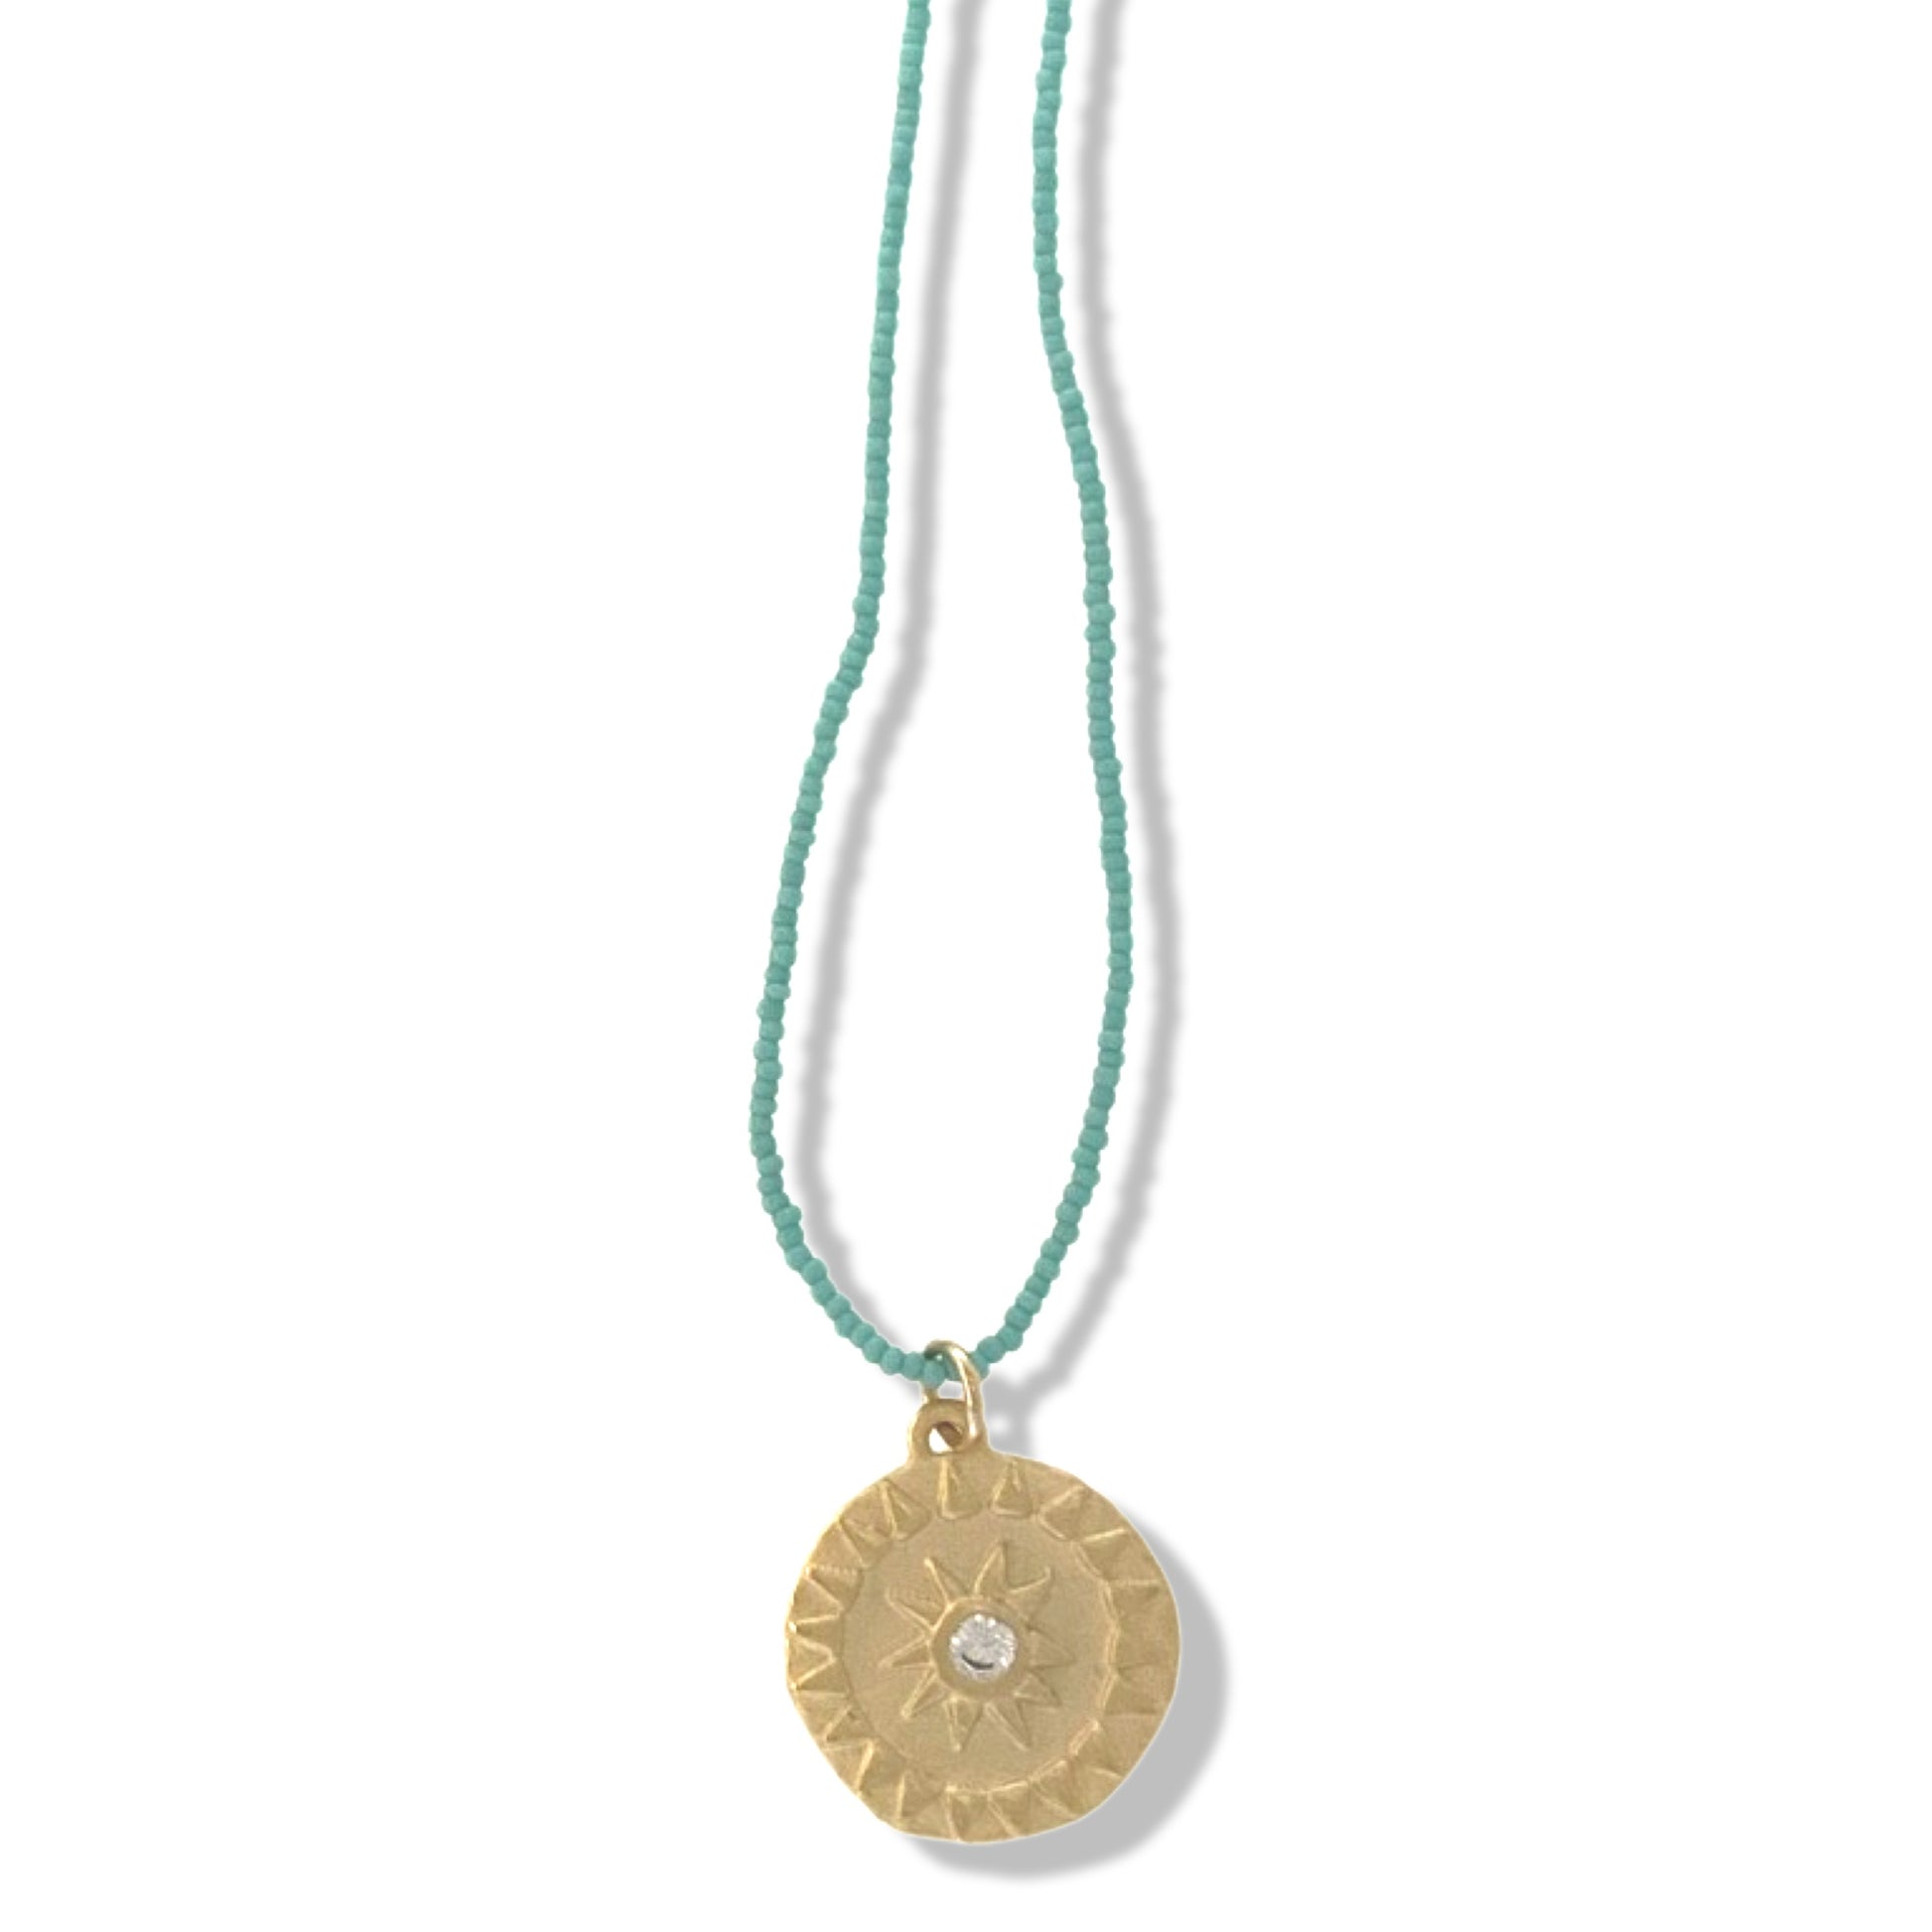 Sol Necklace in Gold on Turquoise Beads | Nalu Nantucket